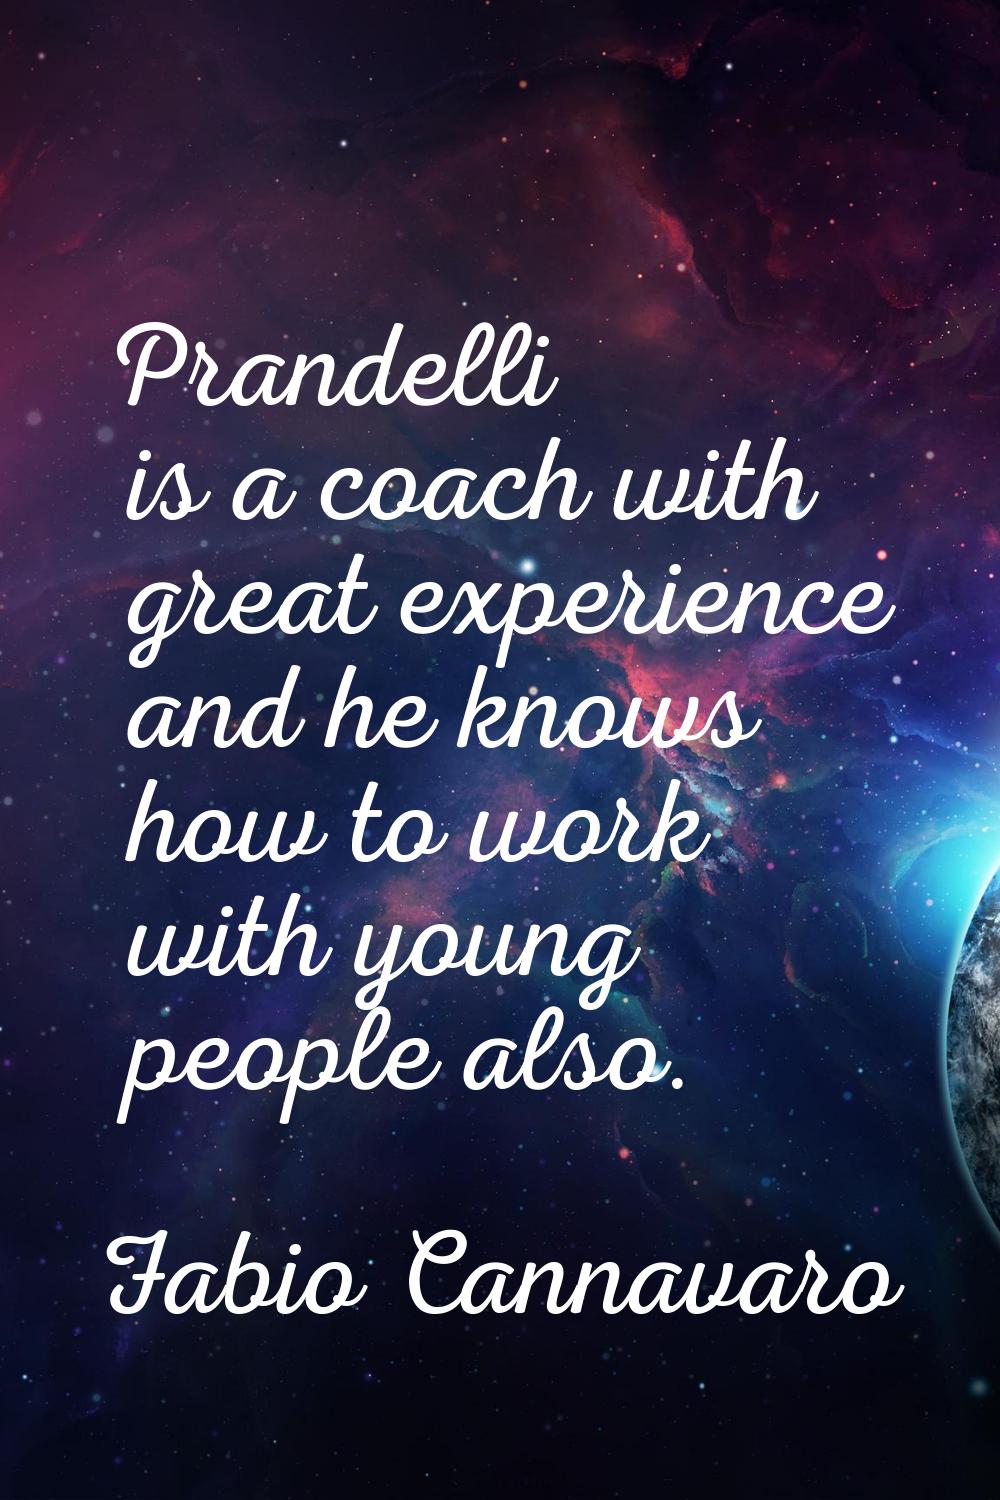 Prandelli is a coach with great experience and he knows how to work with young people also.